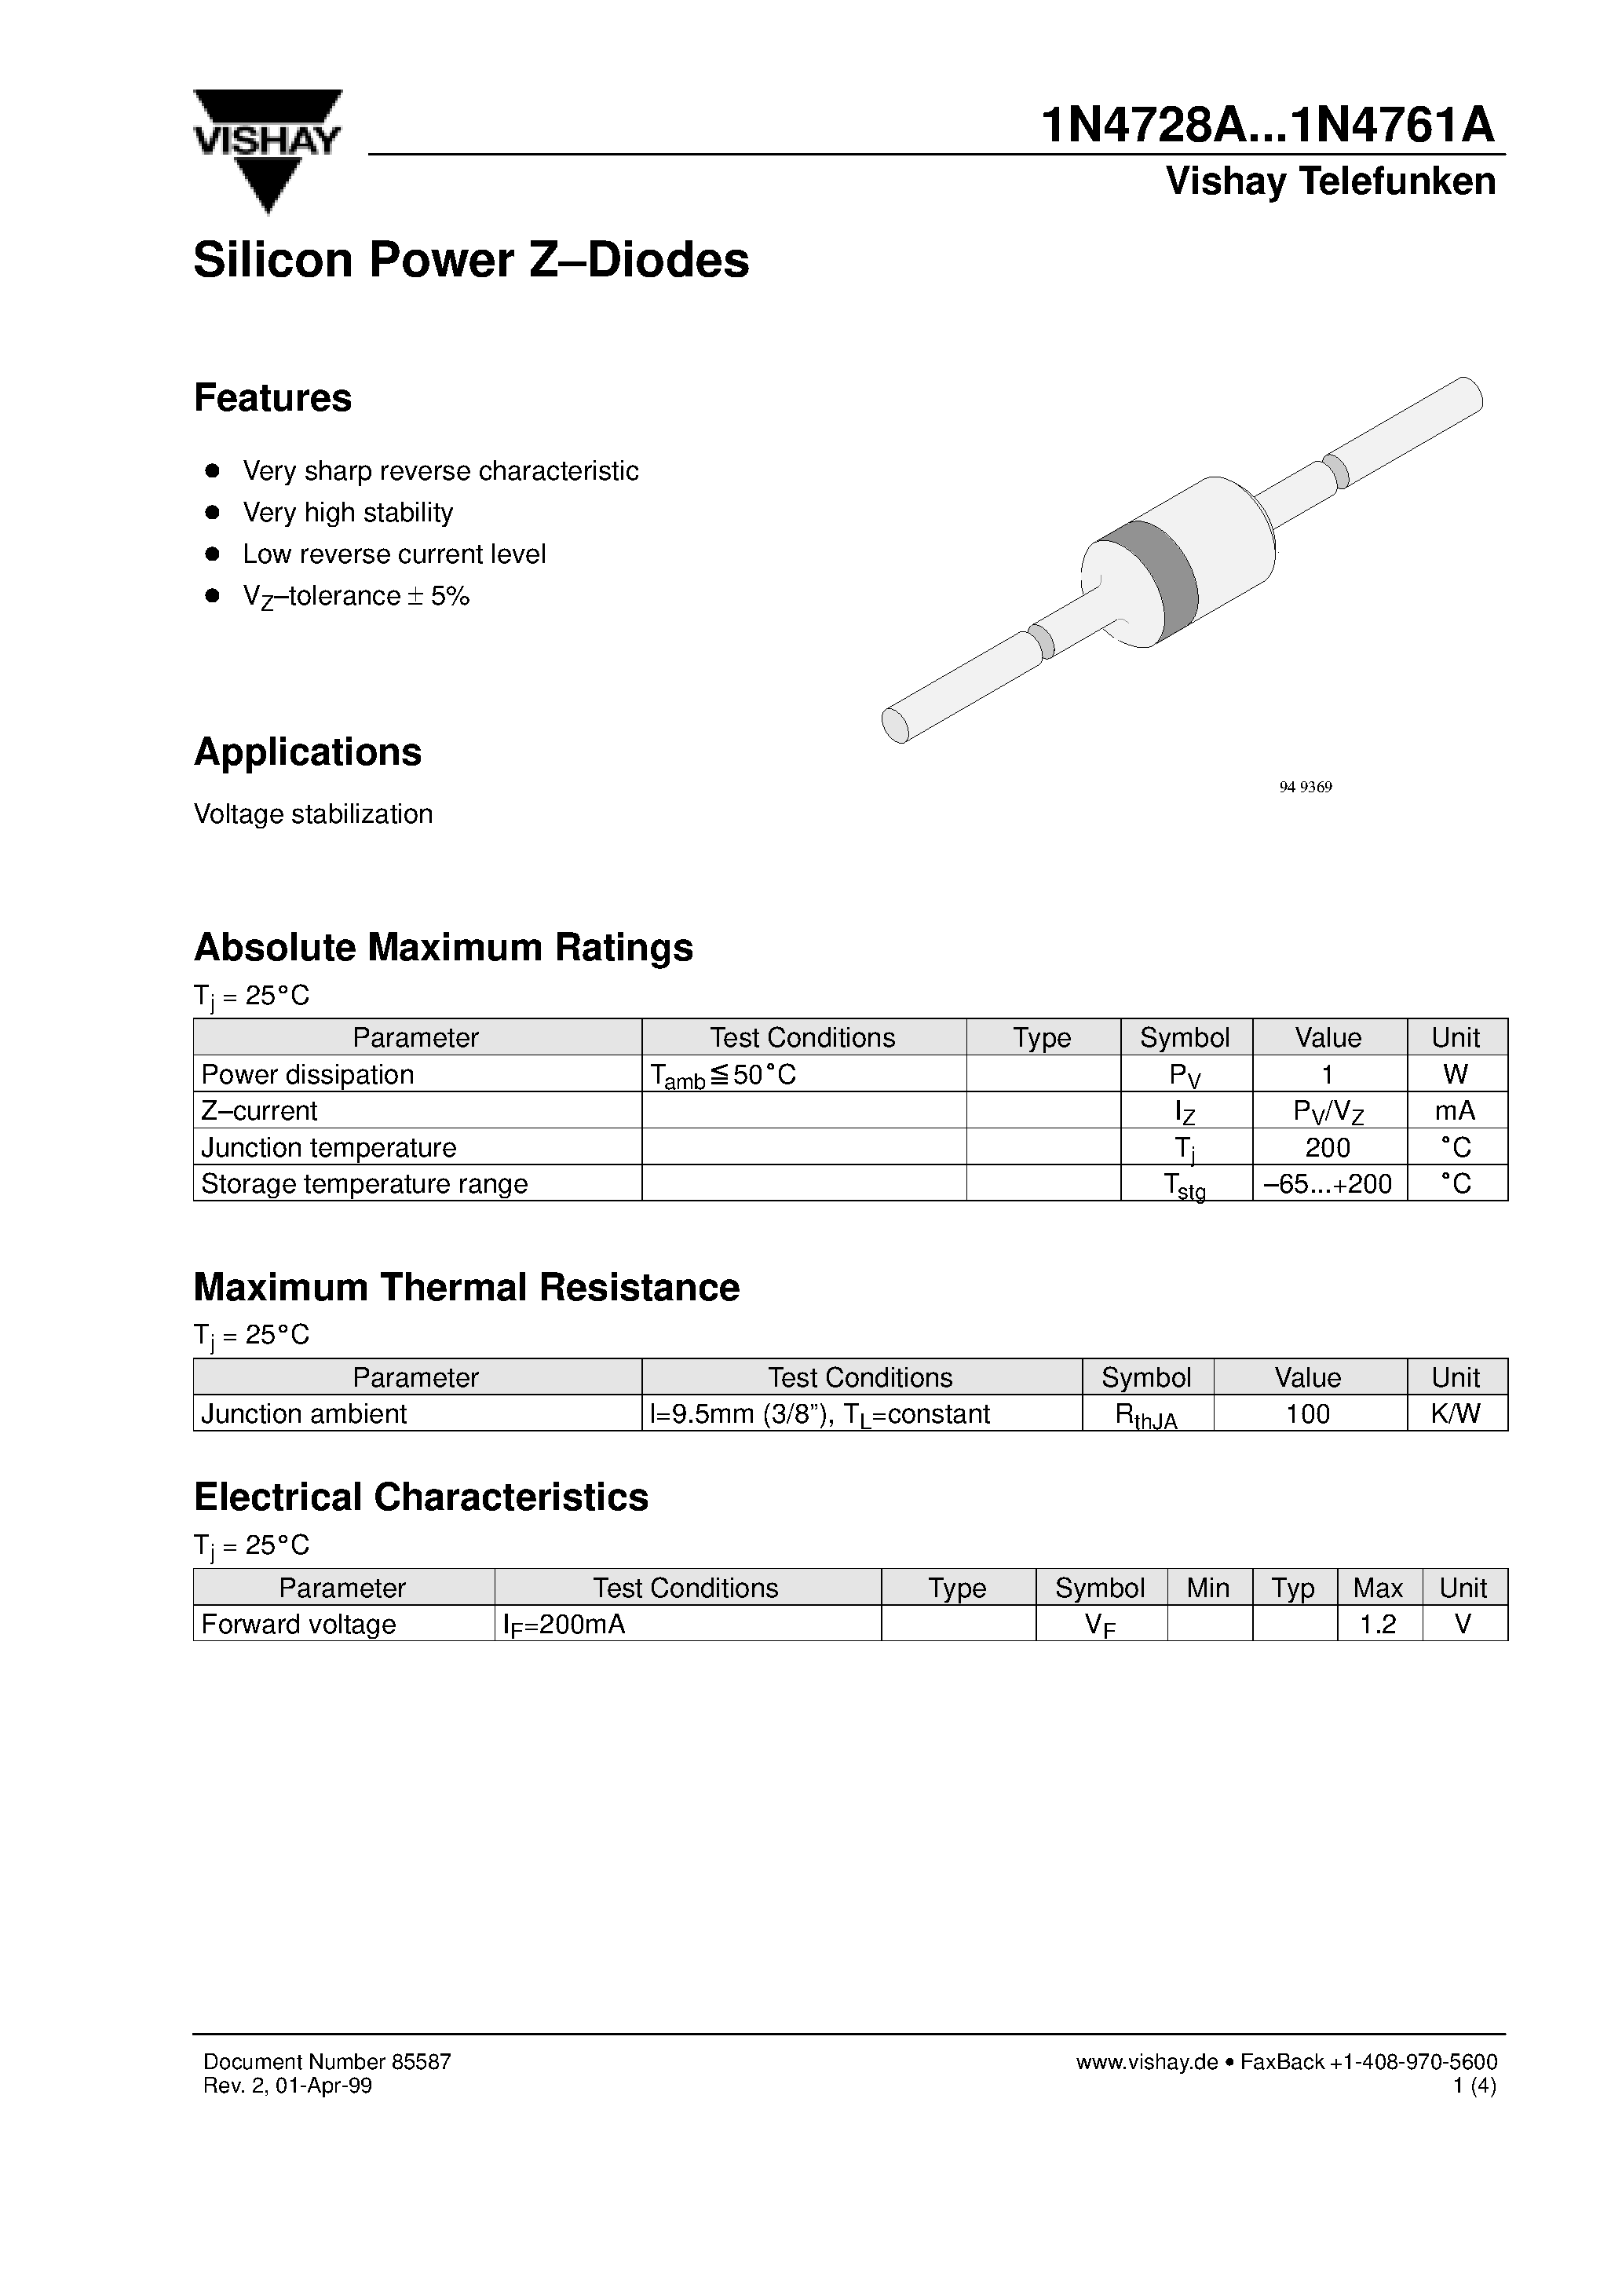 Datasheet 1N4750A - Silicon Power Z-Diodes page 1